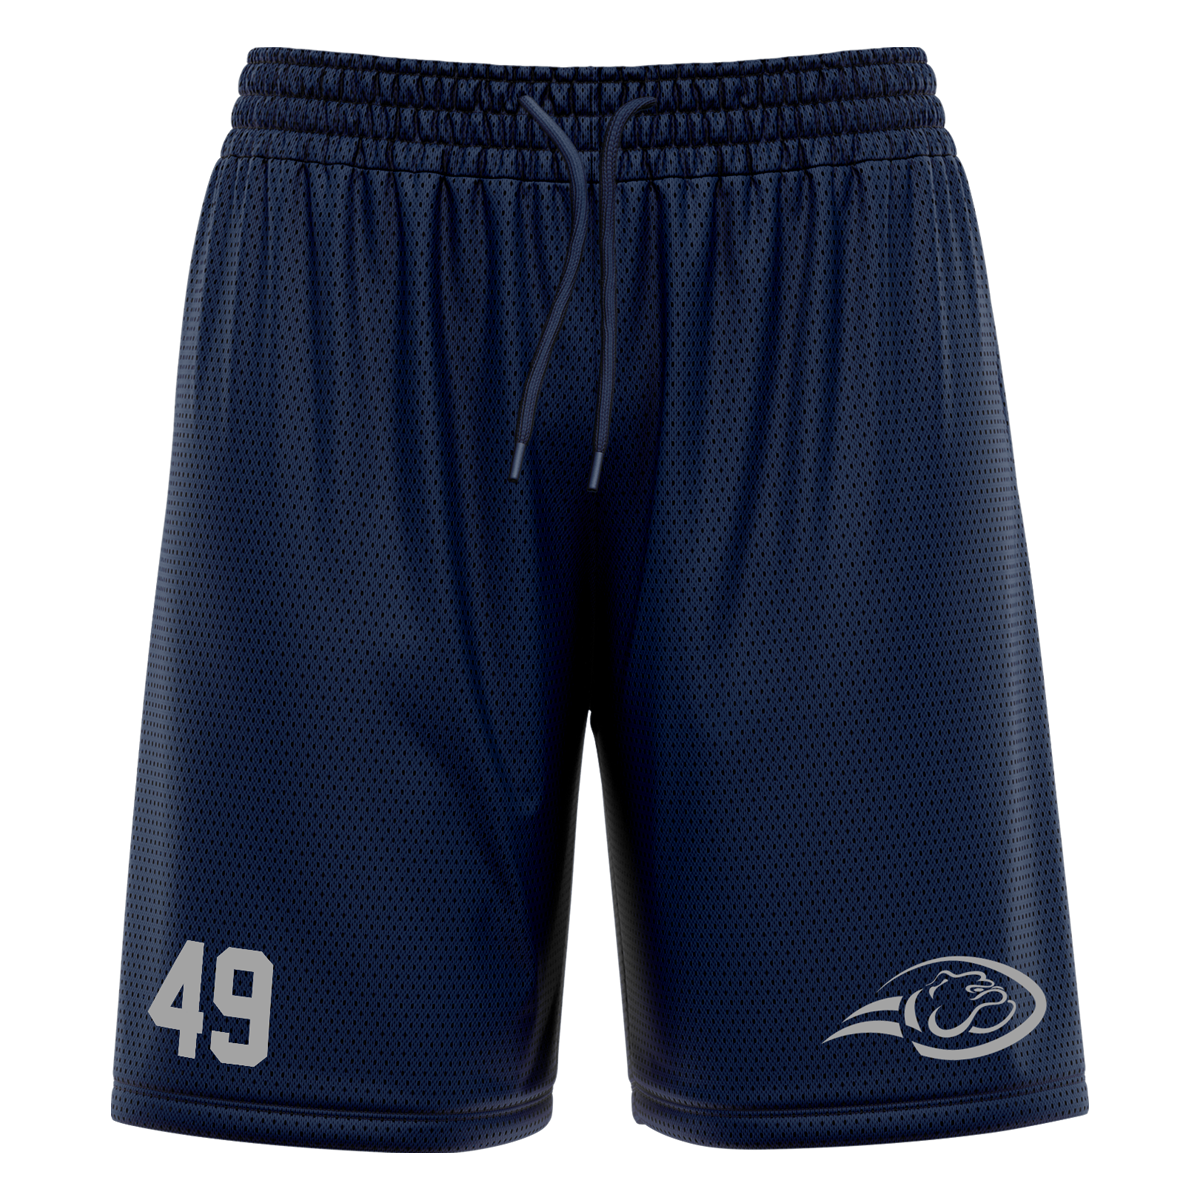 Wilddogs Athletic Mesh-Short with Playernumber/Initials